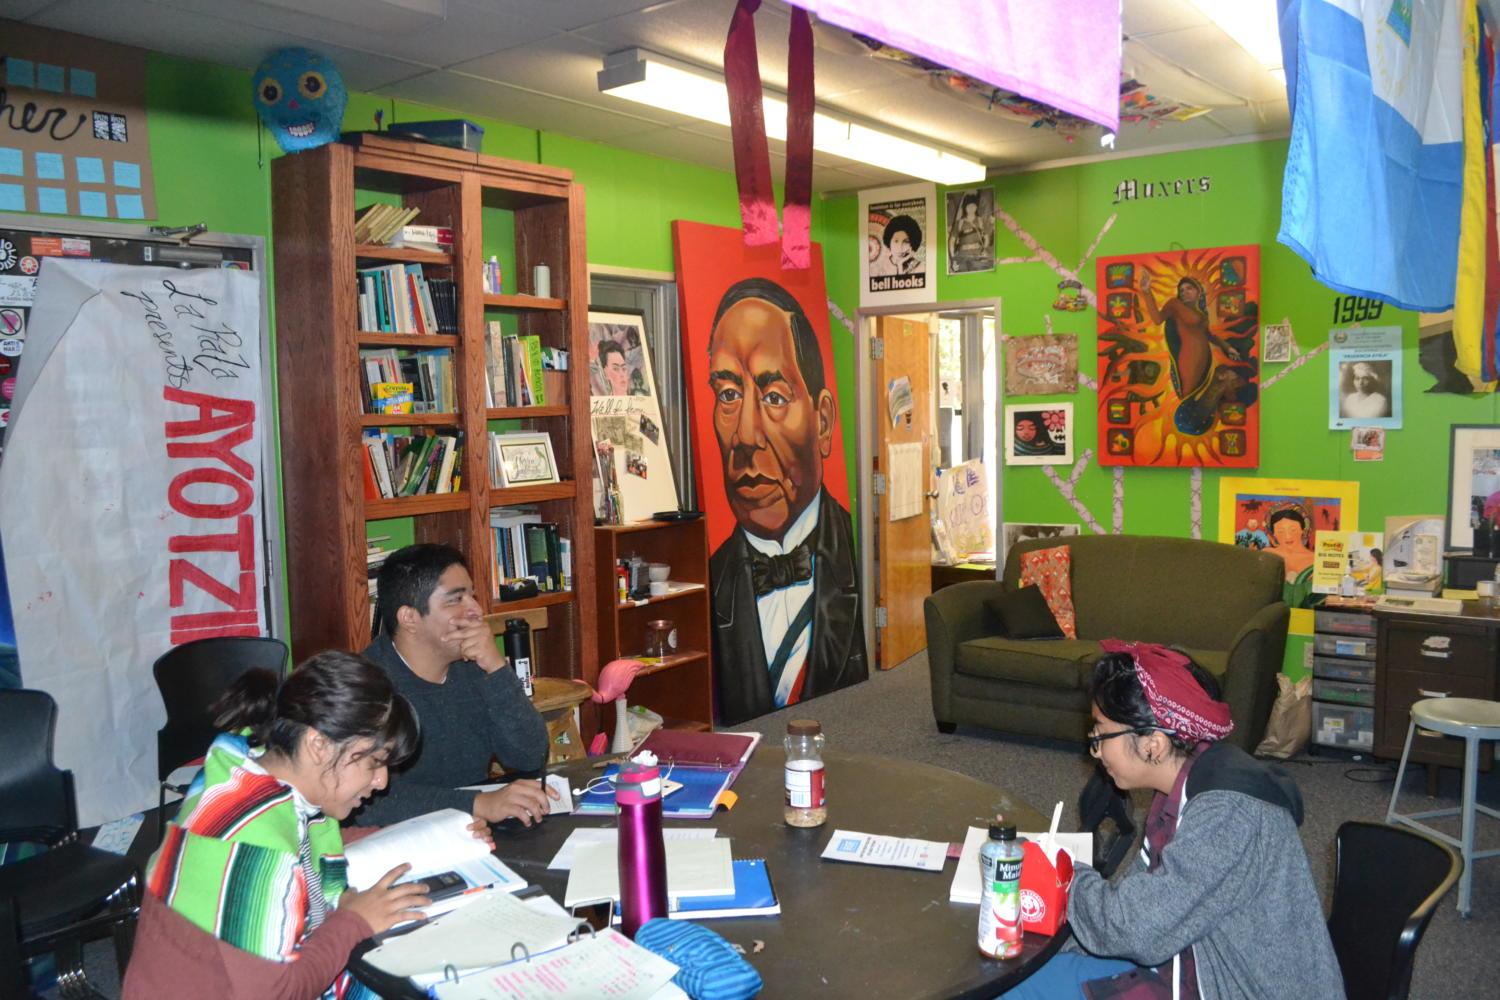 Members study in La Raza Student Center. Over the weekend the group received death threats.